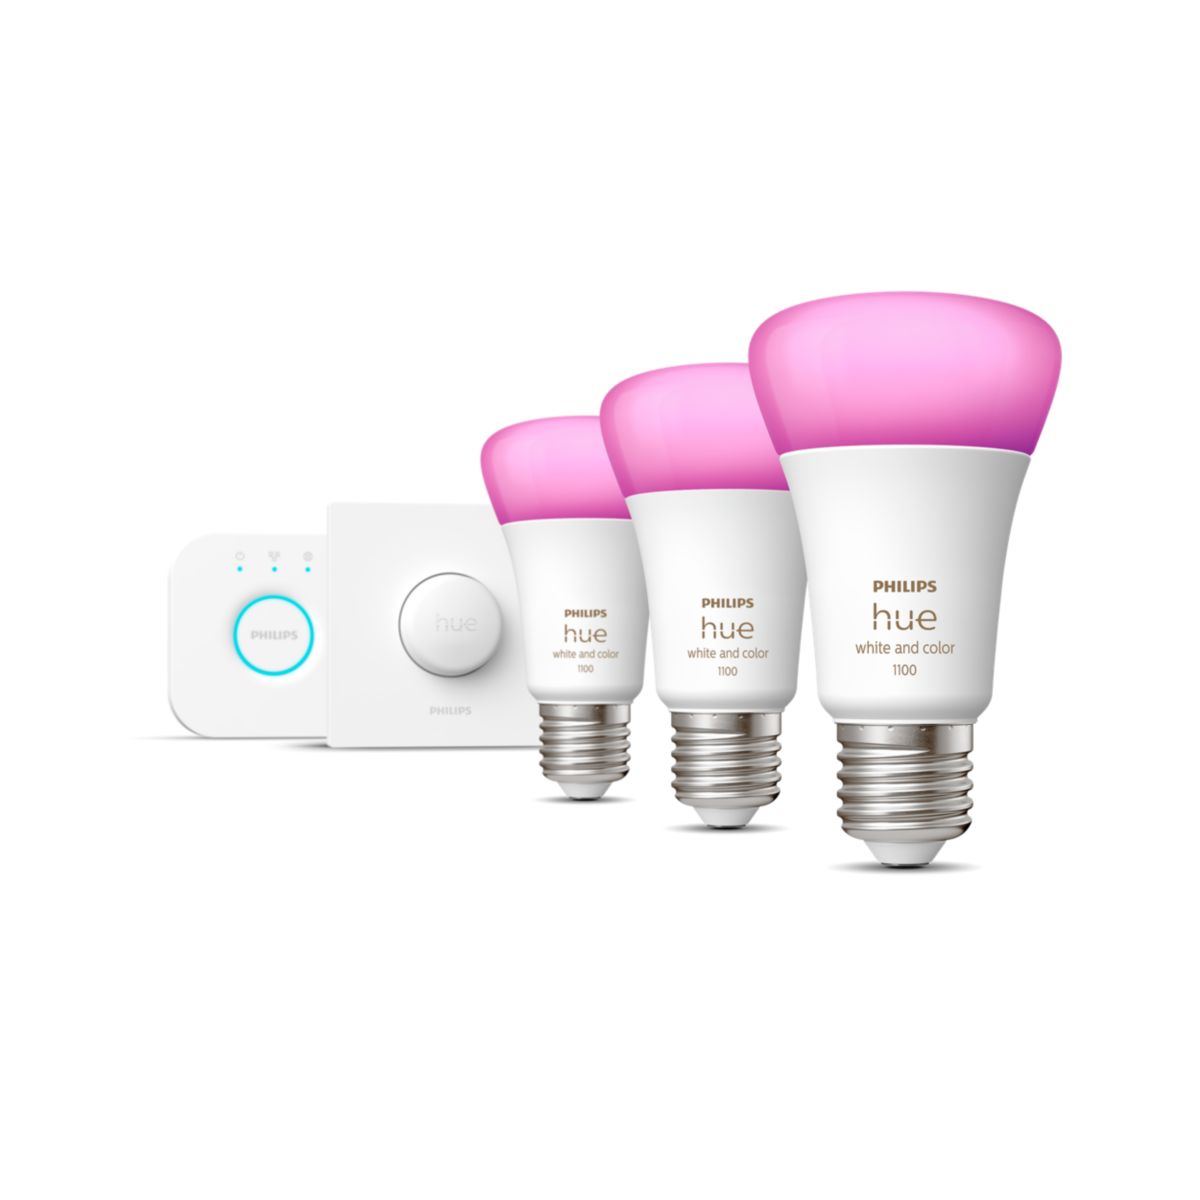 Philips Hue starterkit e27 white and color ambiance + smart button